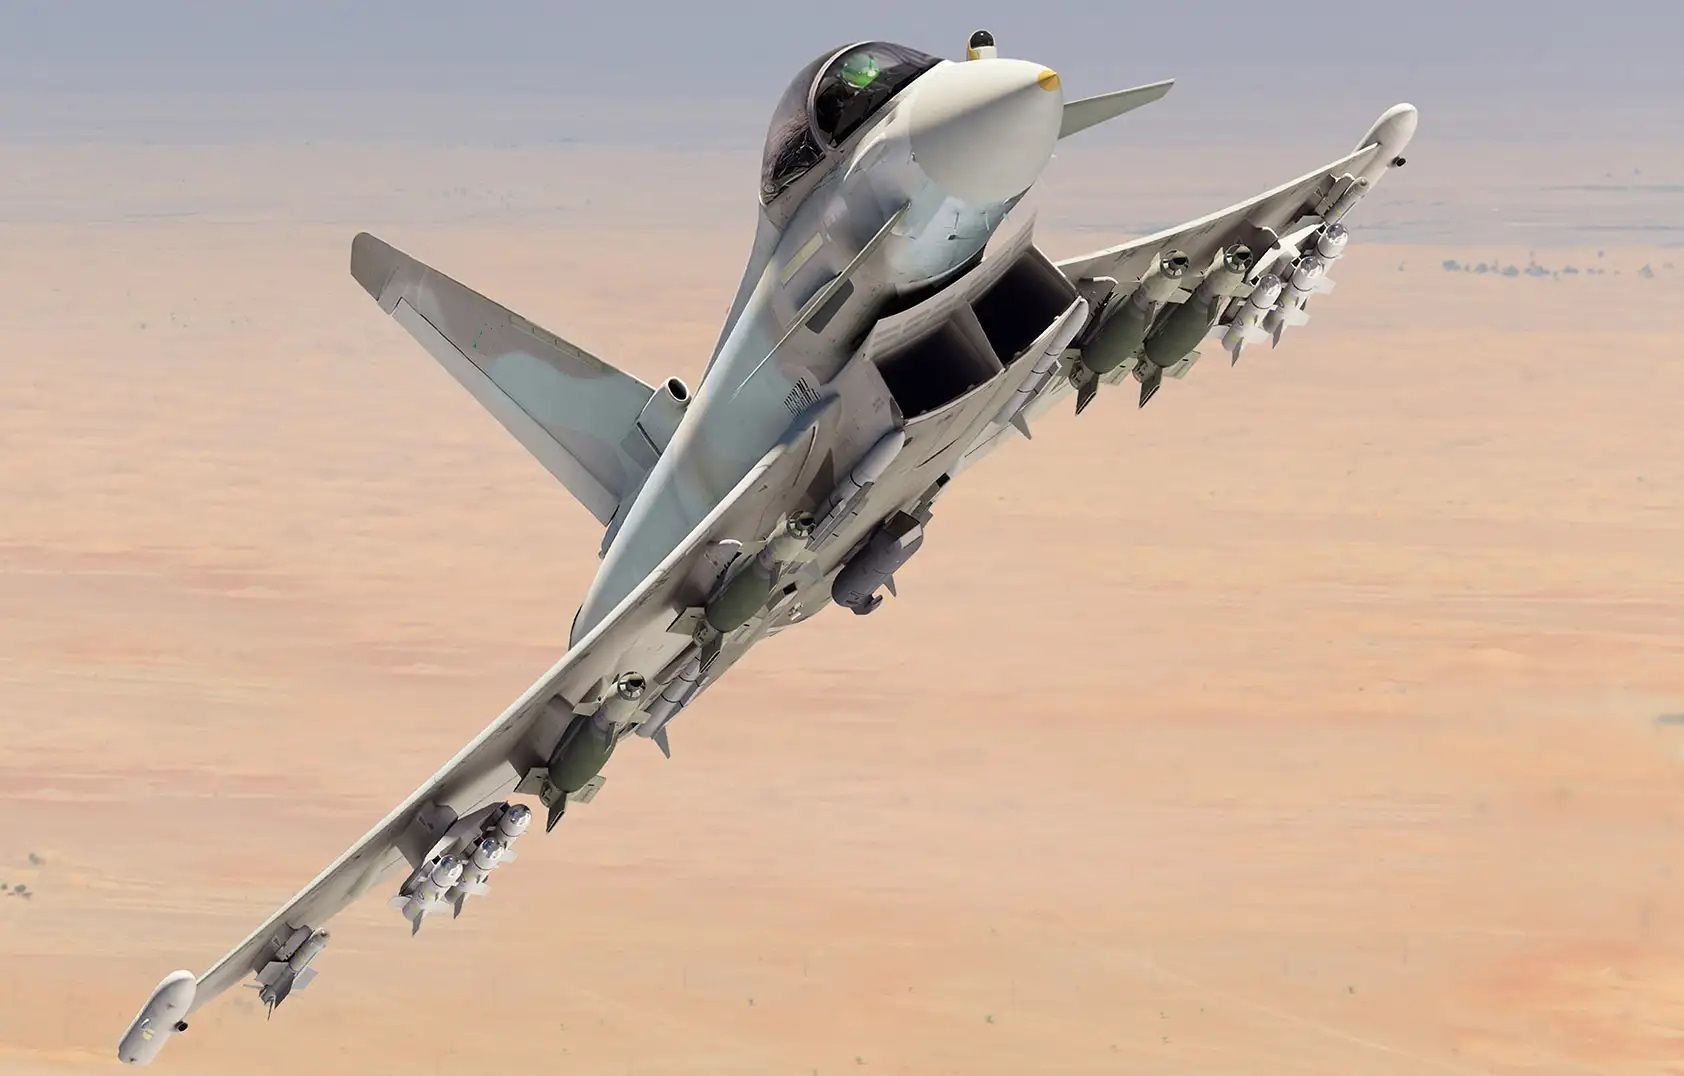 Qatar Starts receiving ordered Eurofighter Typhoons in August